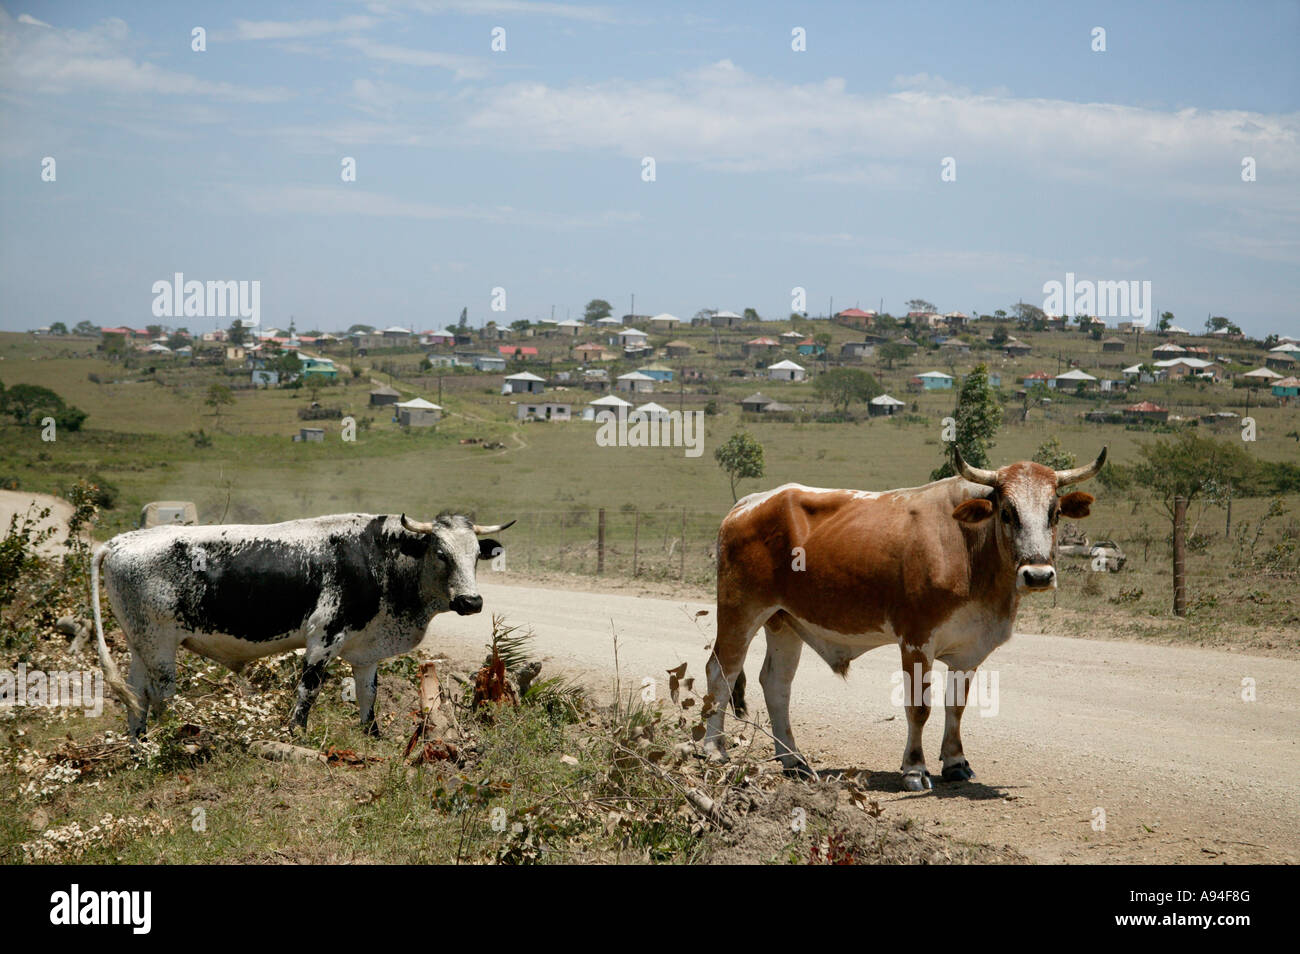 Two oxen at the side of a dust road in the Transkei with an informal settlement in the background Transkei Stock Photo